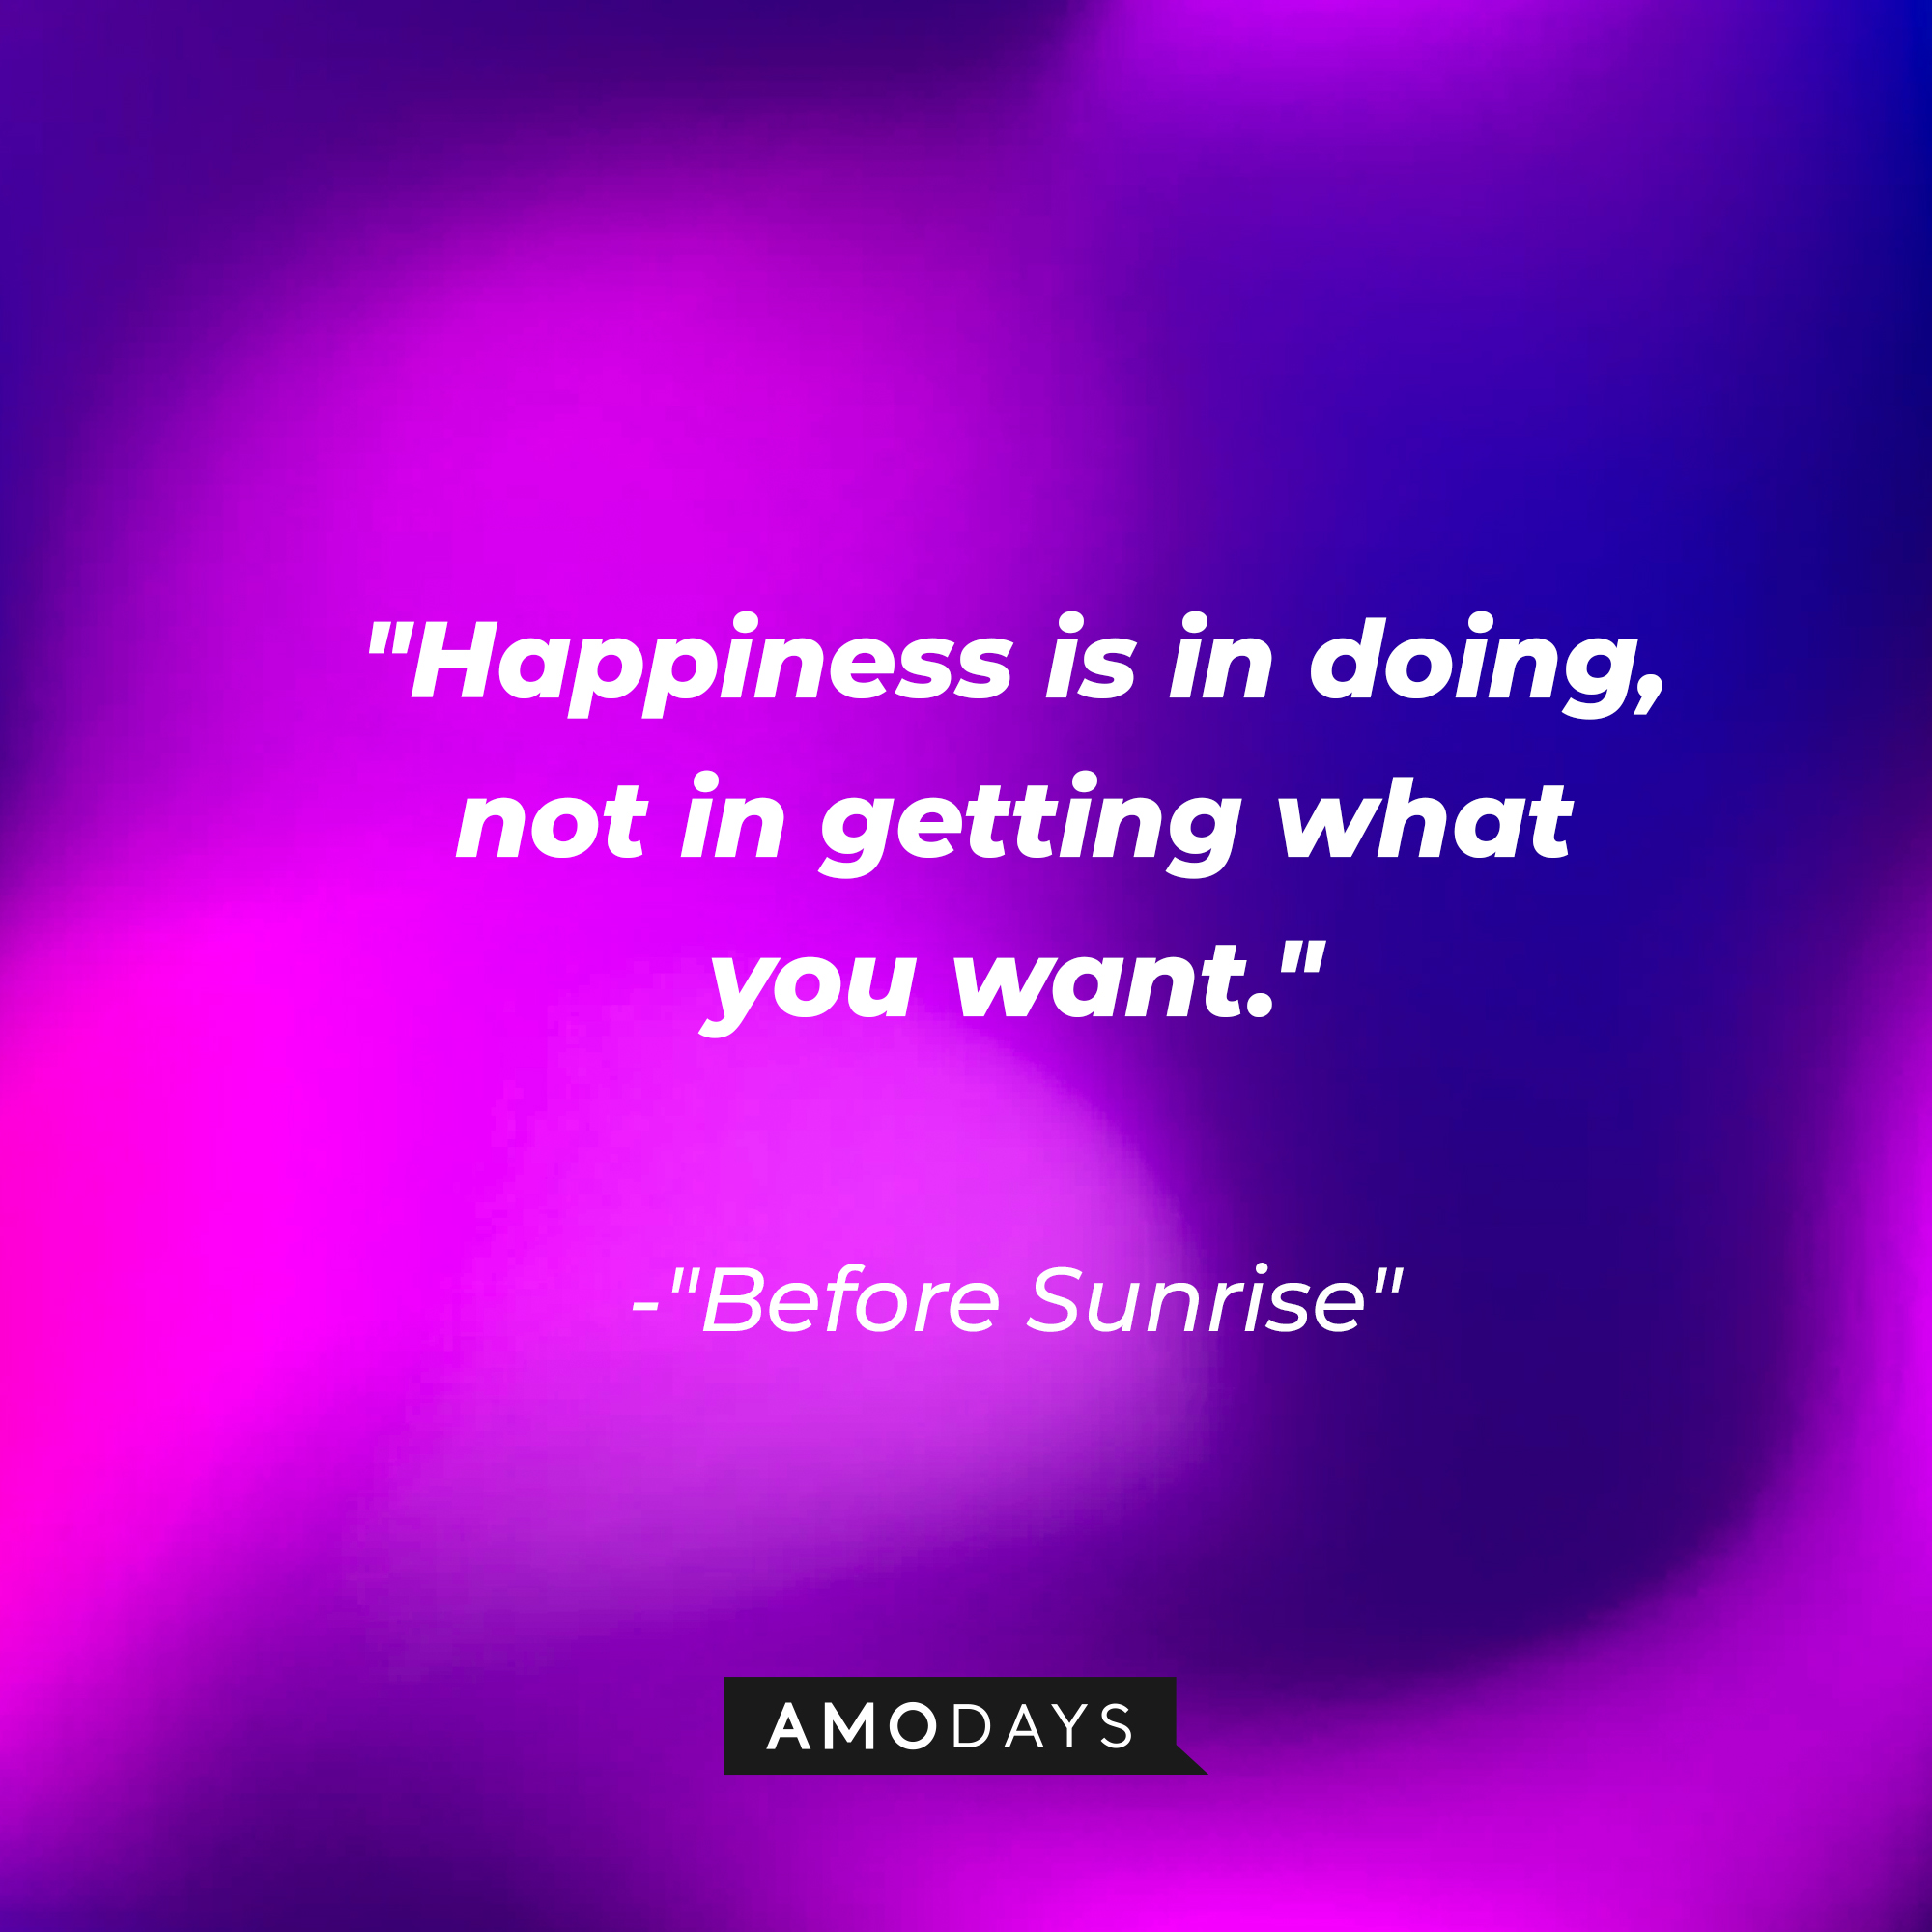 "Before Sunrise" quote: "Happiness is in doing, not in getting what you want." | Source: AmoDays